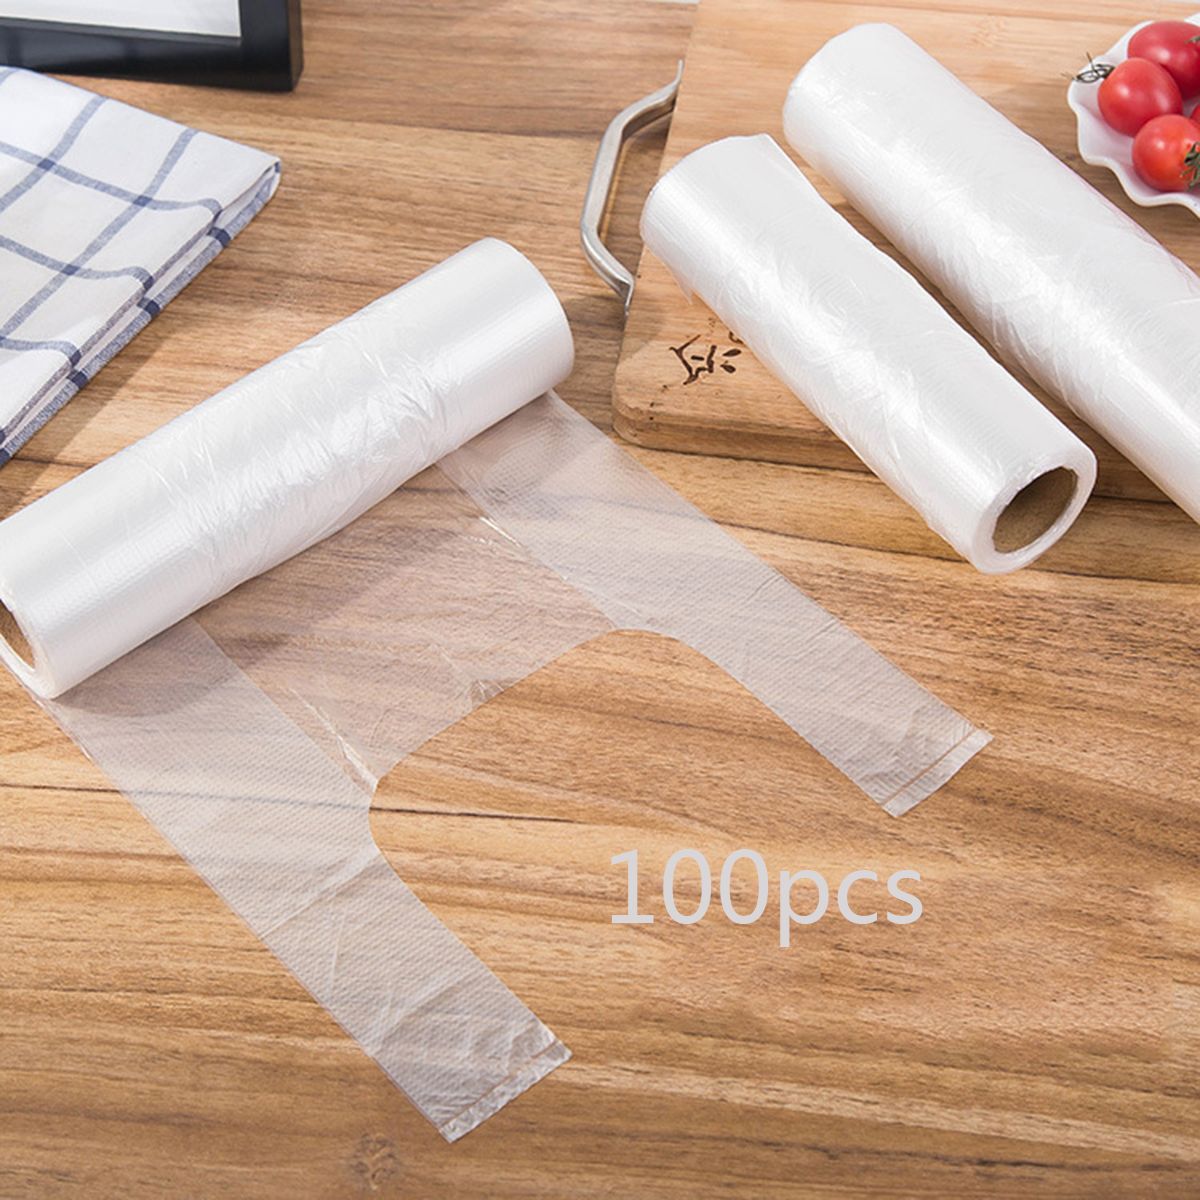 100-pack Food and Fridge Freezer Bags Rolls Clear Plastic Bag Disposable Thickened Vest-style Fresh-